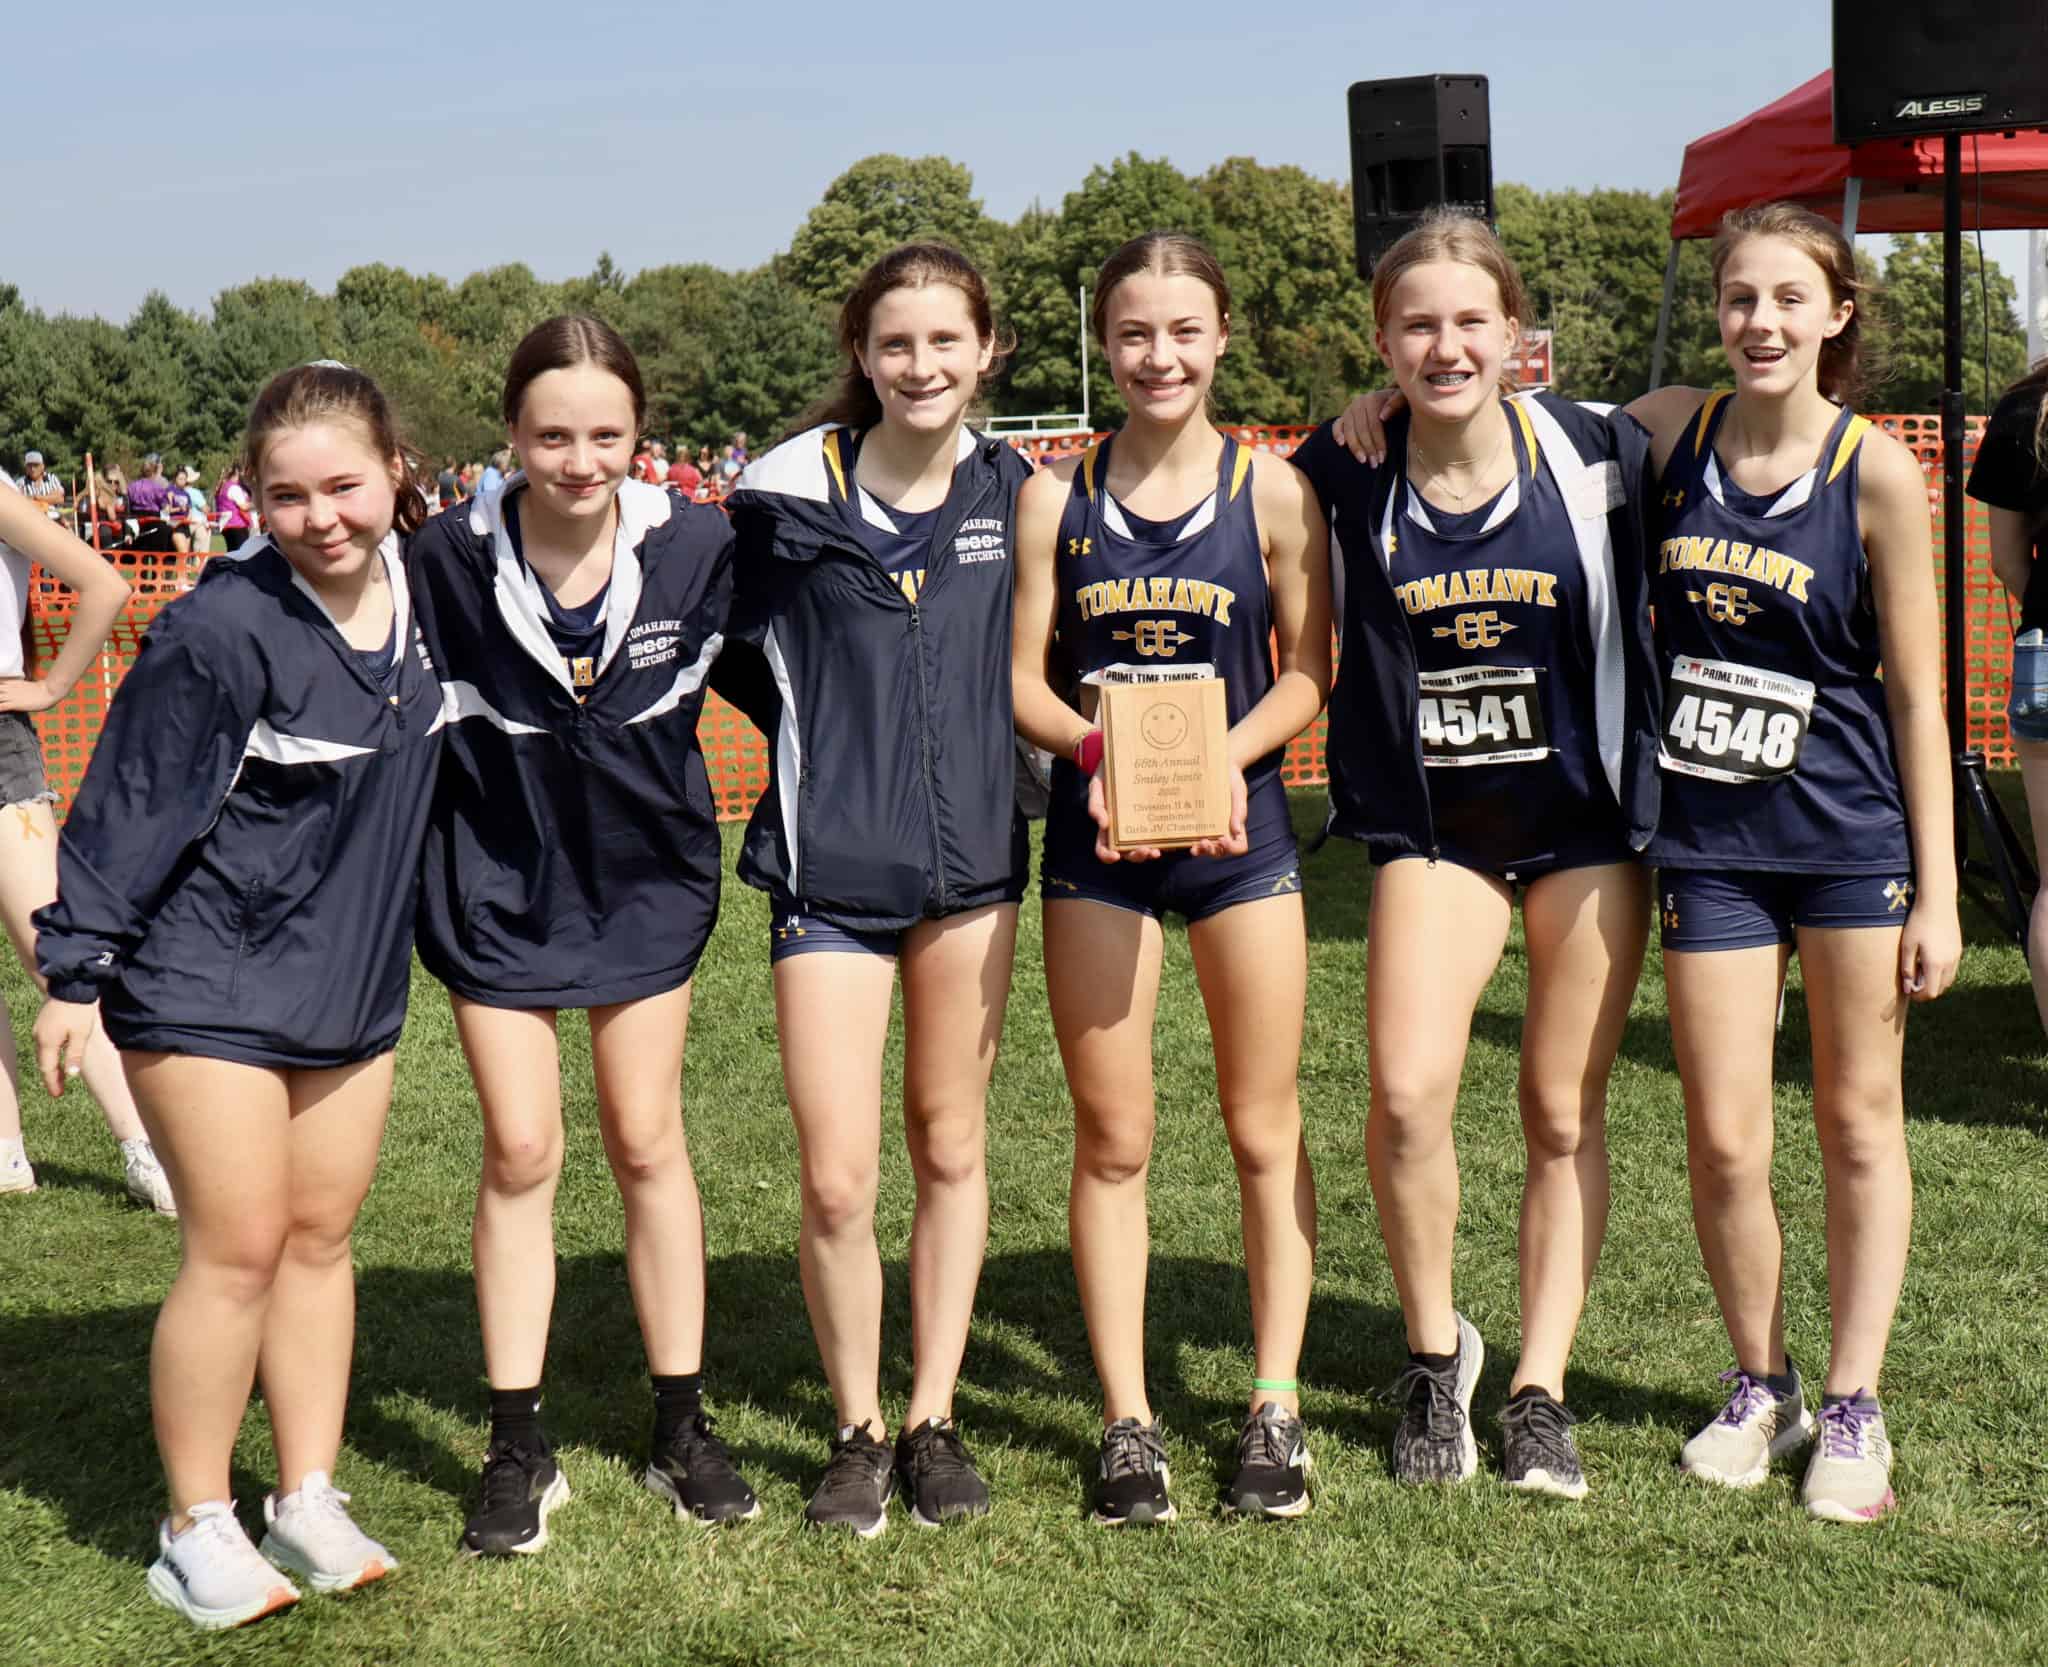 Tomahawk runners take part in 66th annual Smiley Invite